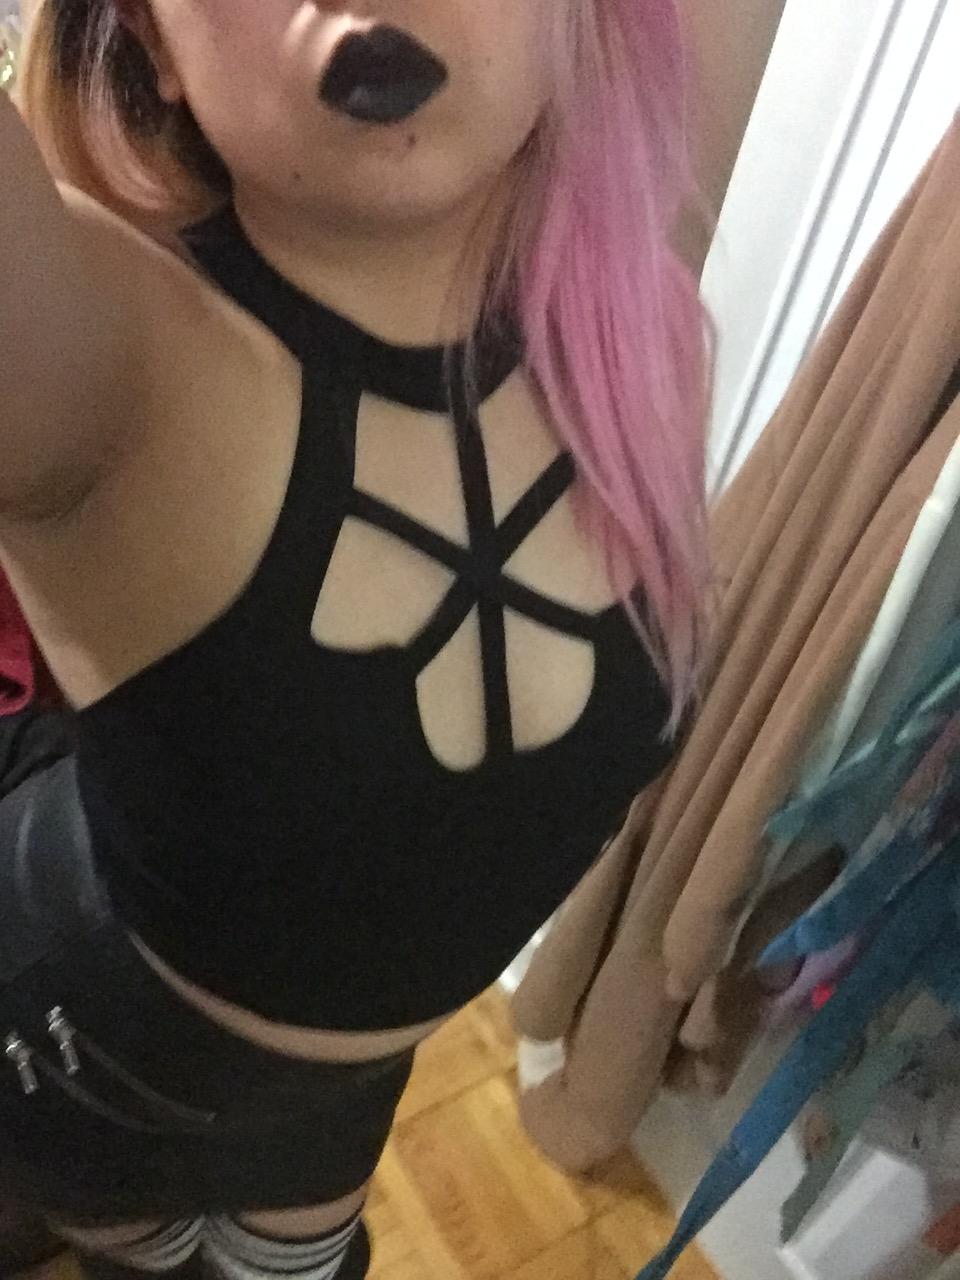 There's something really [f]un about putting a club outfit together (even though I'm not going out)